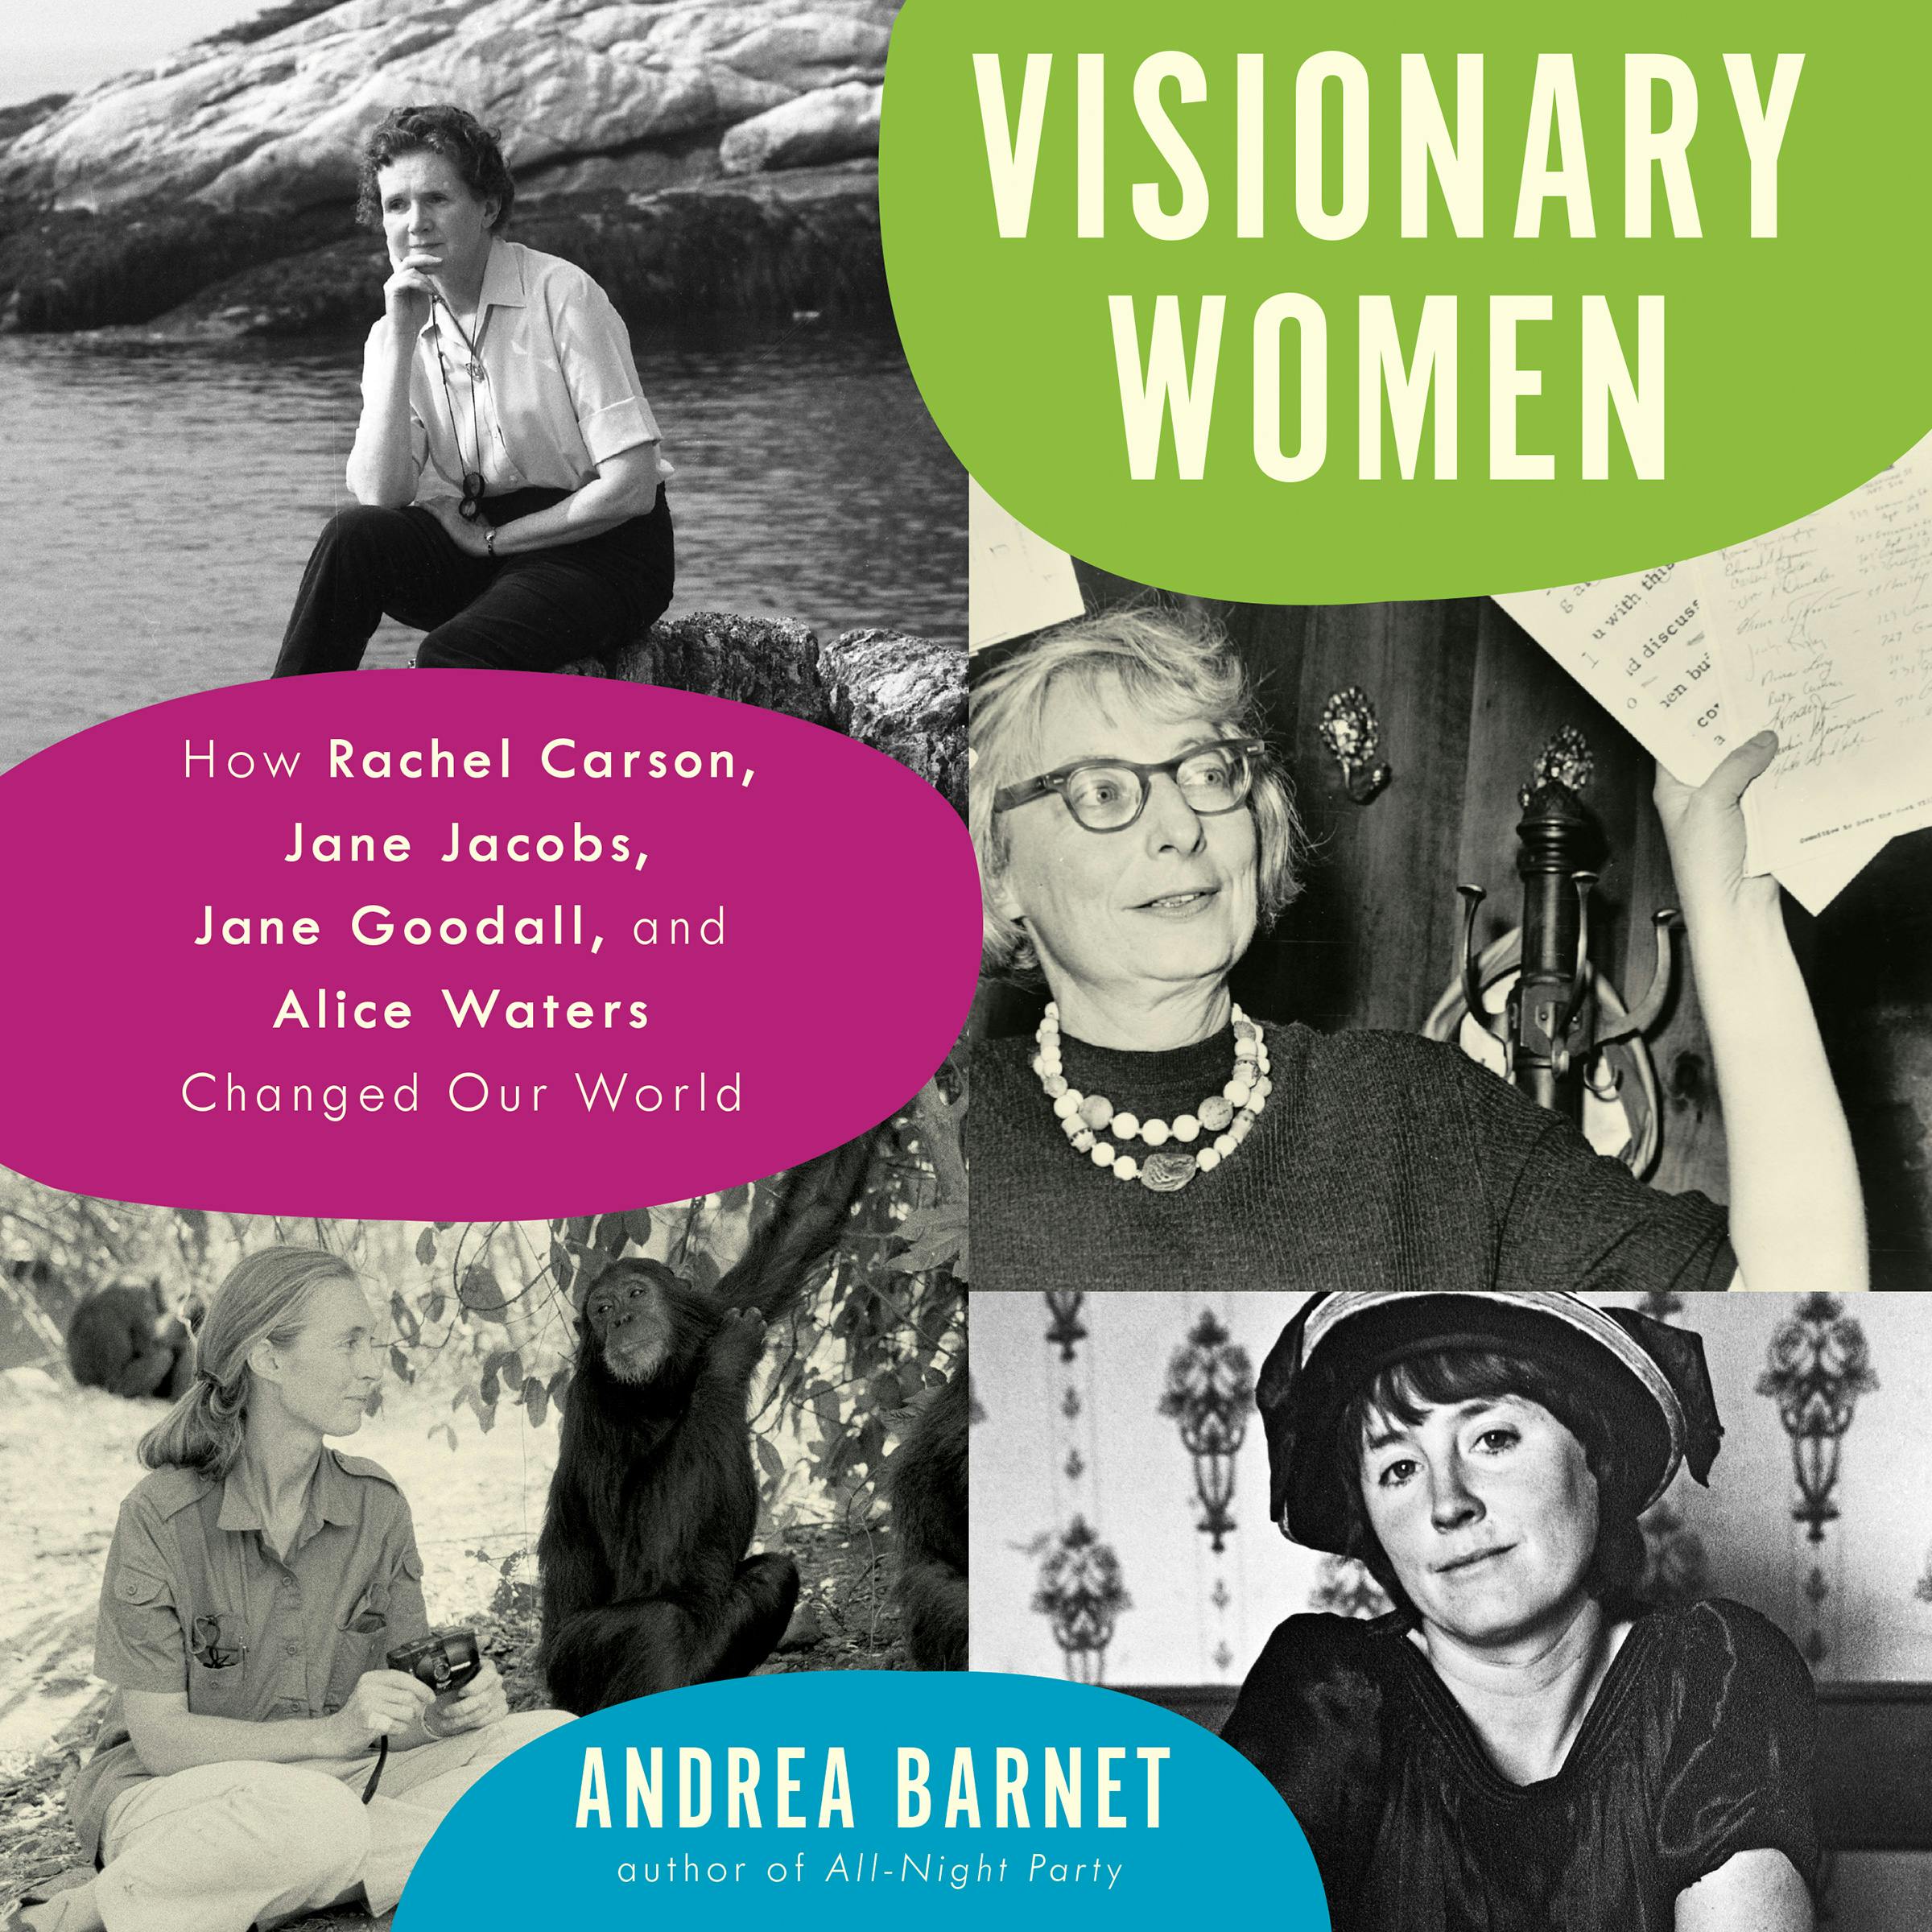 Visionary Women: How Rachel Carson, Jane Jacobs, Jane Goodall, and Alice Waters Changed Our World - Andrea Barnet